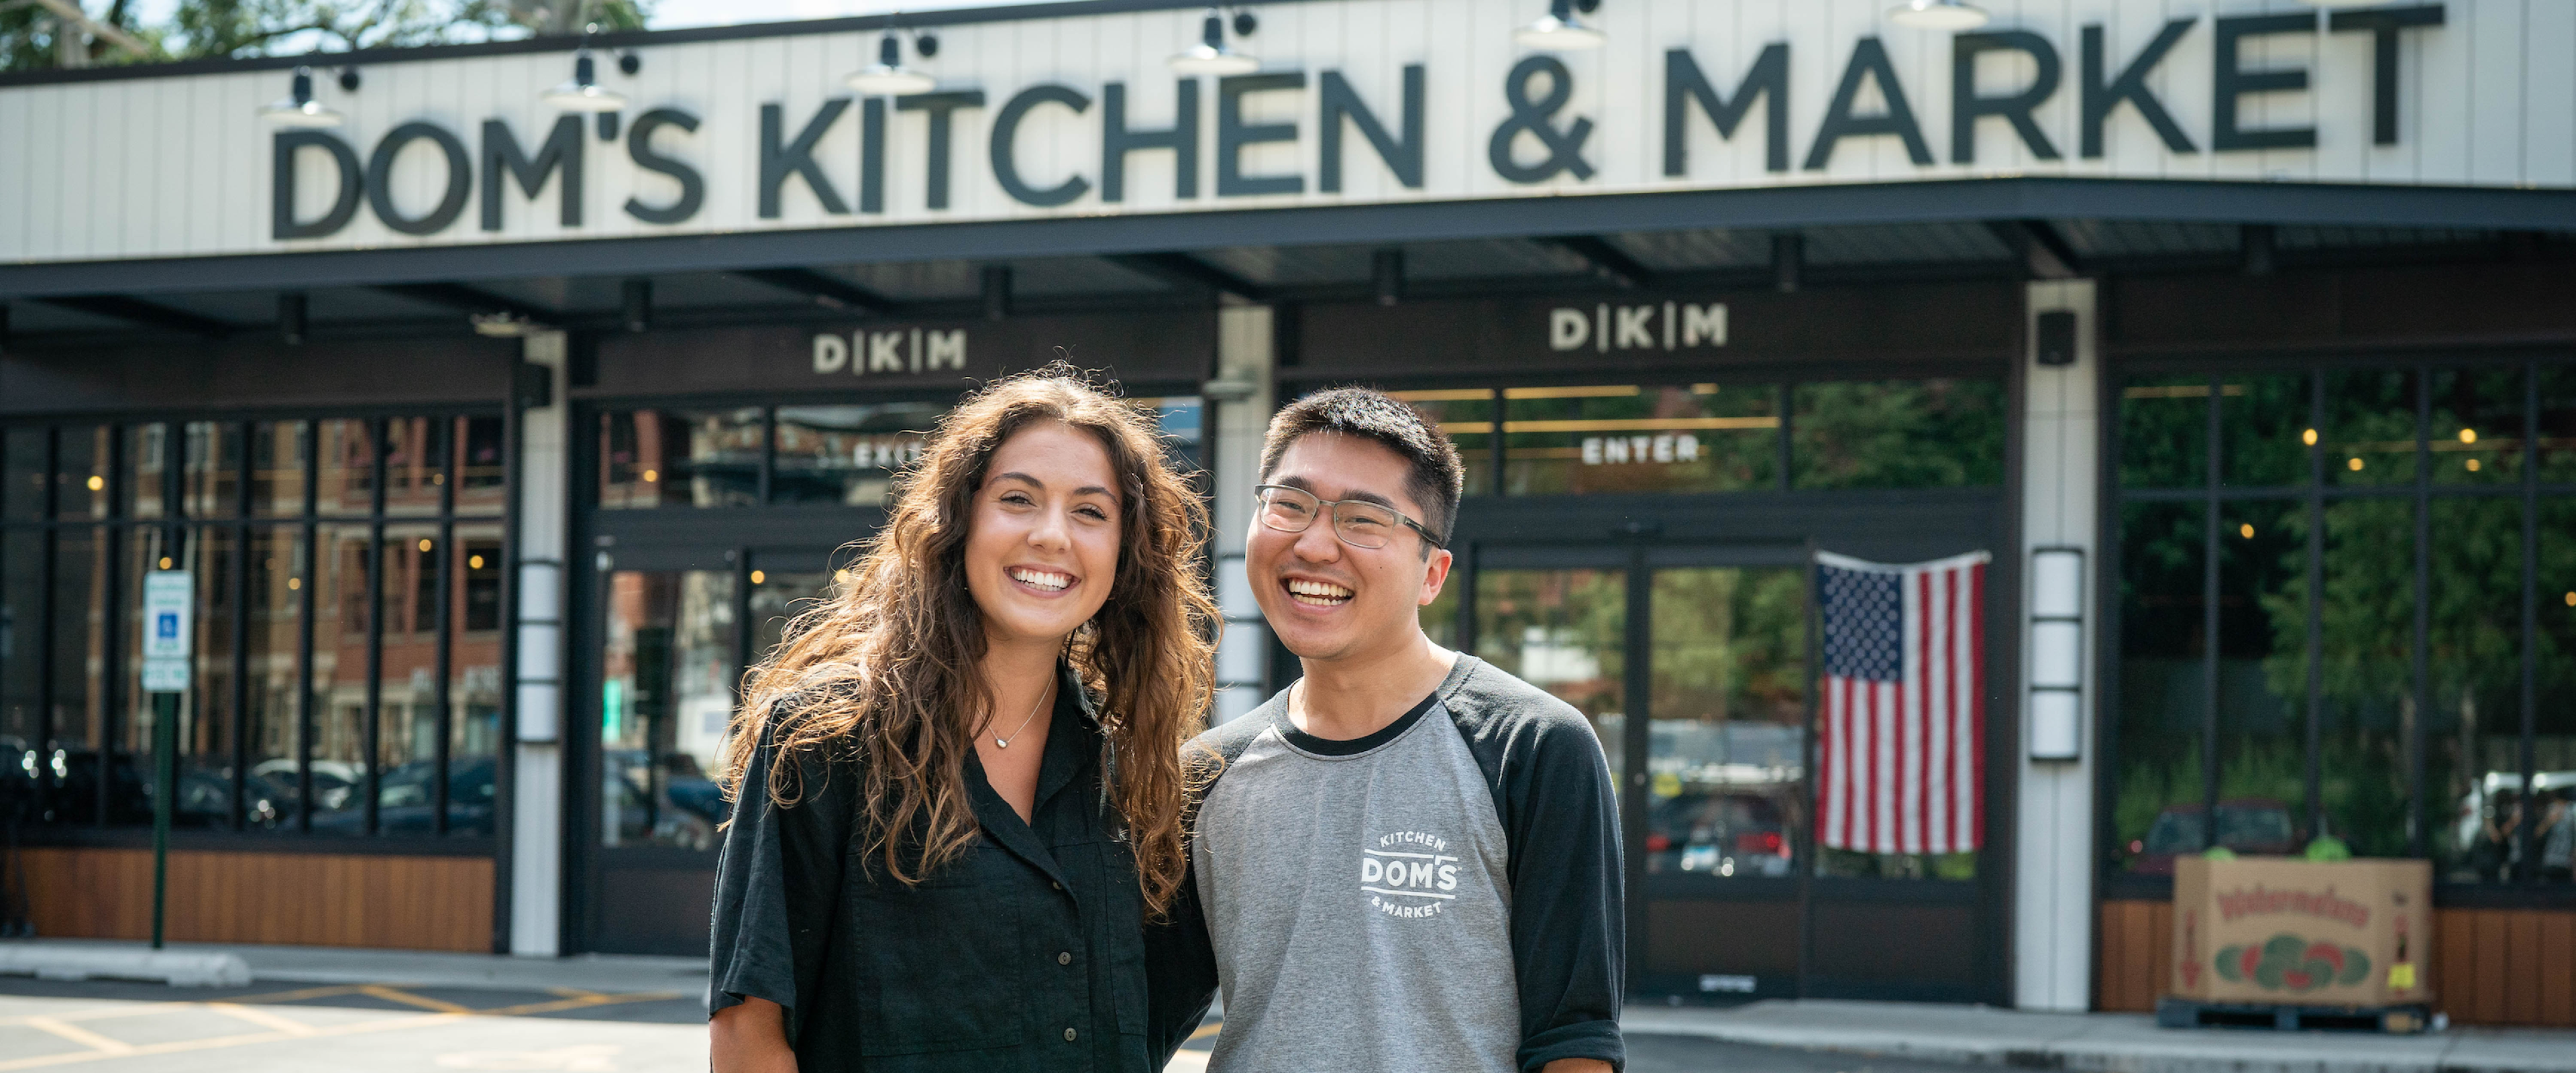 Korina Luco and Dominic Gee pose for a picture in front of Dom's Kitchen and Market.